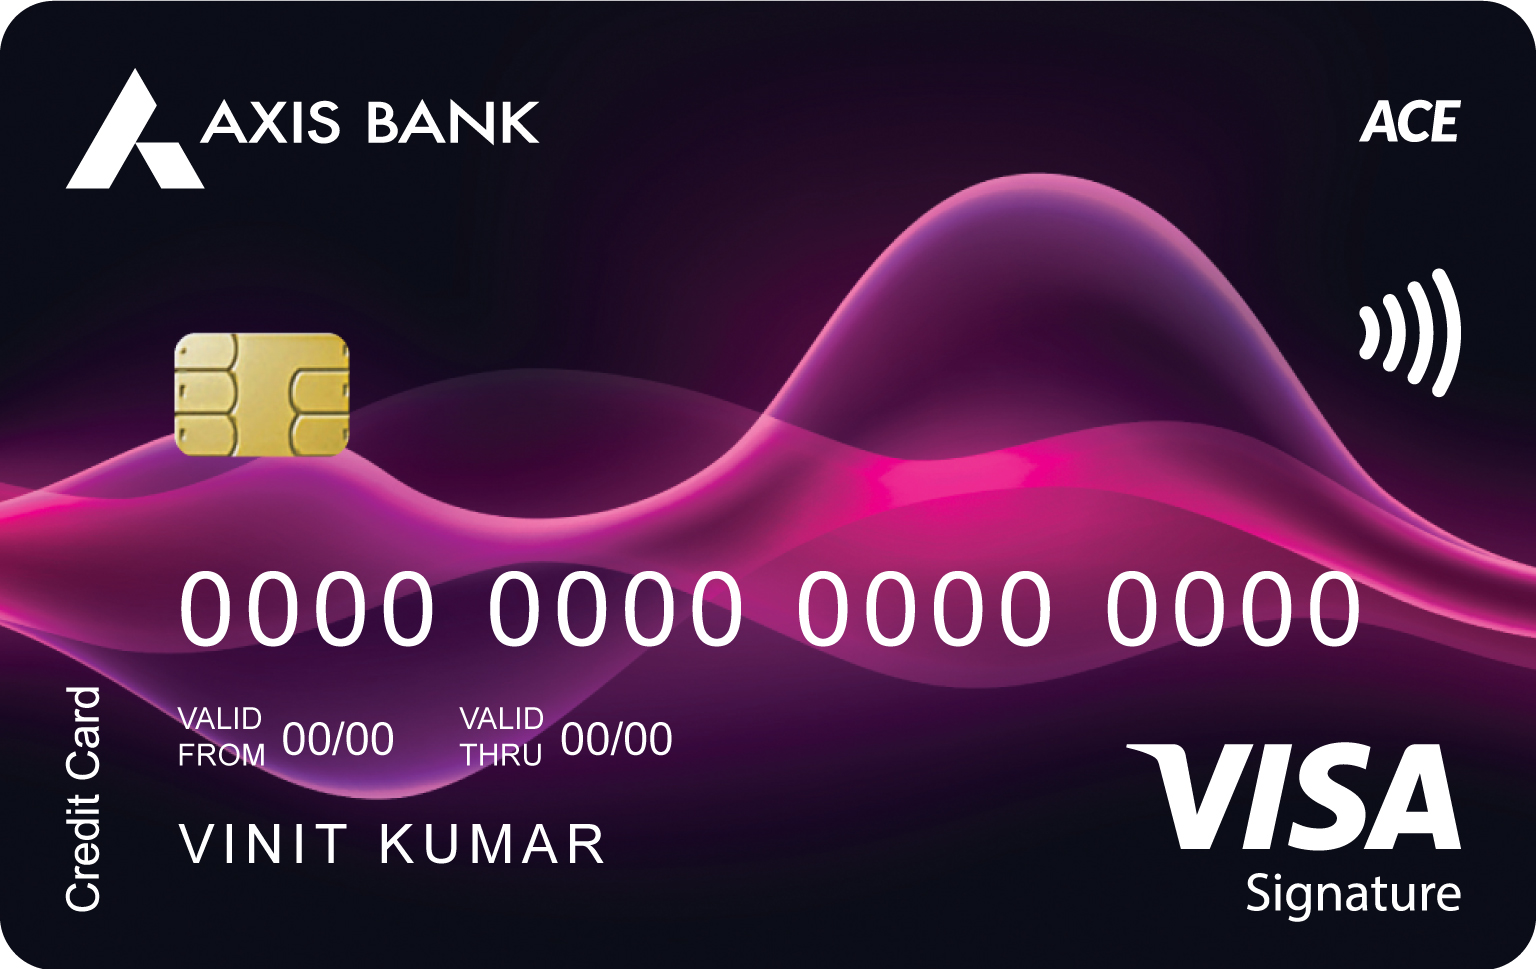 Axis Bank launches ACE Credit Card in collaboration with Google Pay and Visa